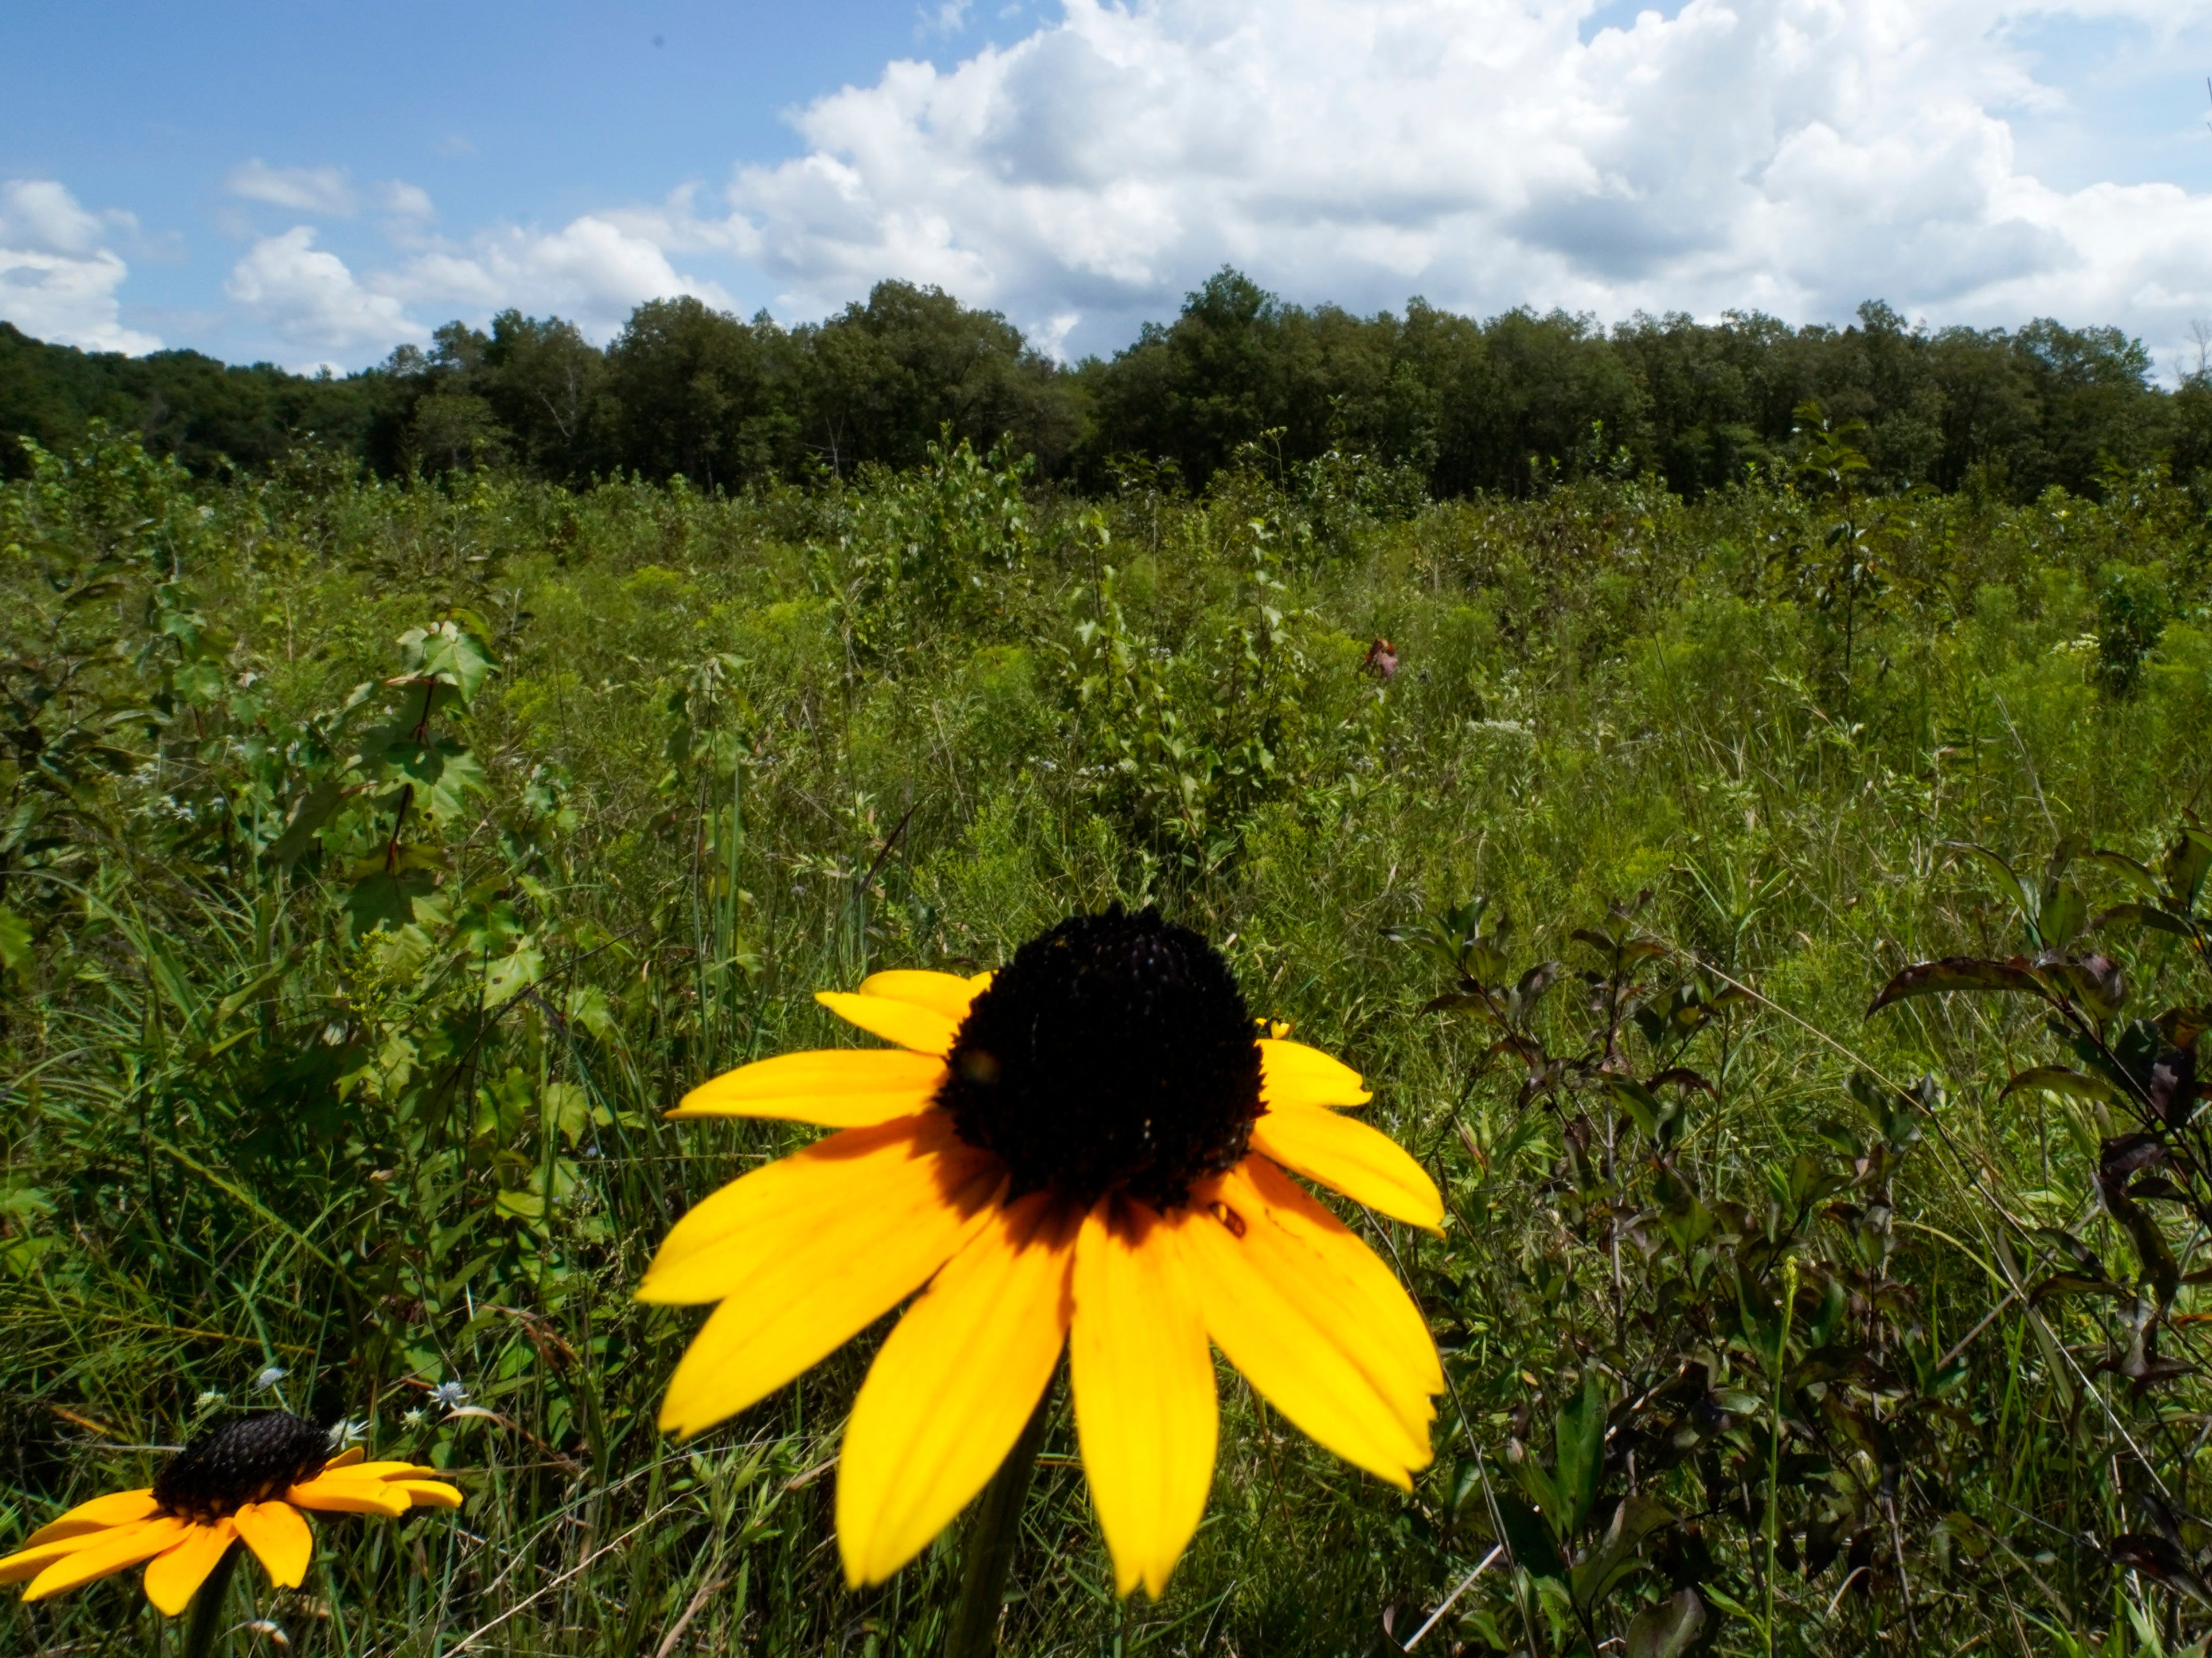 A black-eyed Susan flower grows among a variety of plants in an open grassland area at the May Prairie State Natural Area on Aug. 20, 2020, in Manchester, Tennessee. Across much of the South, at least 90% of the native grasslands have been lost